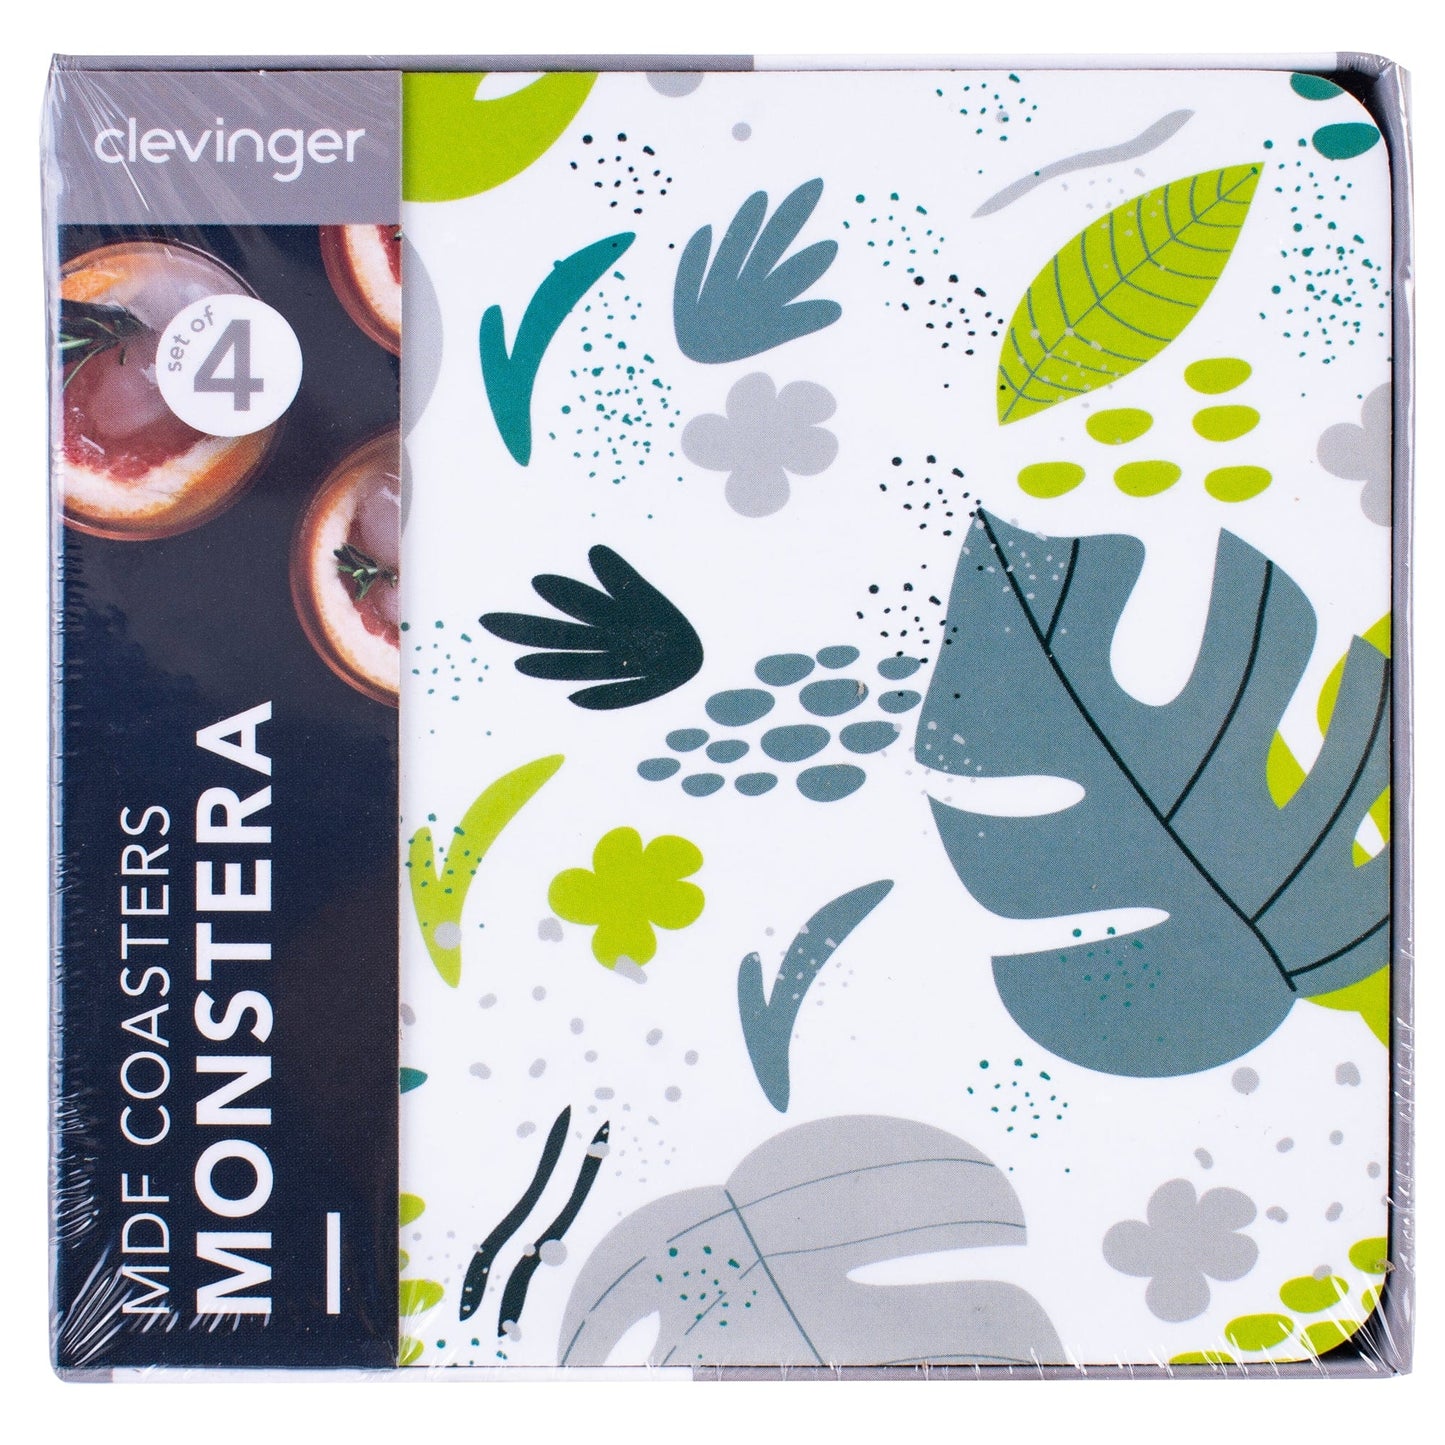 Clevinger dining coster Clevinger Set of 4 MDF Monstera Coasters